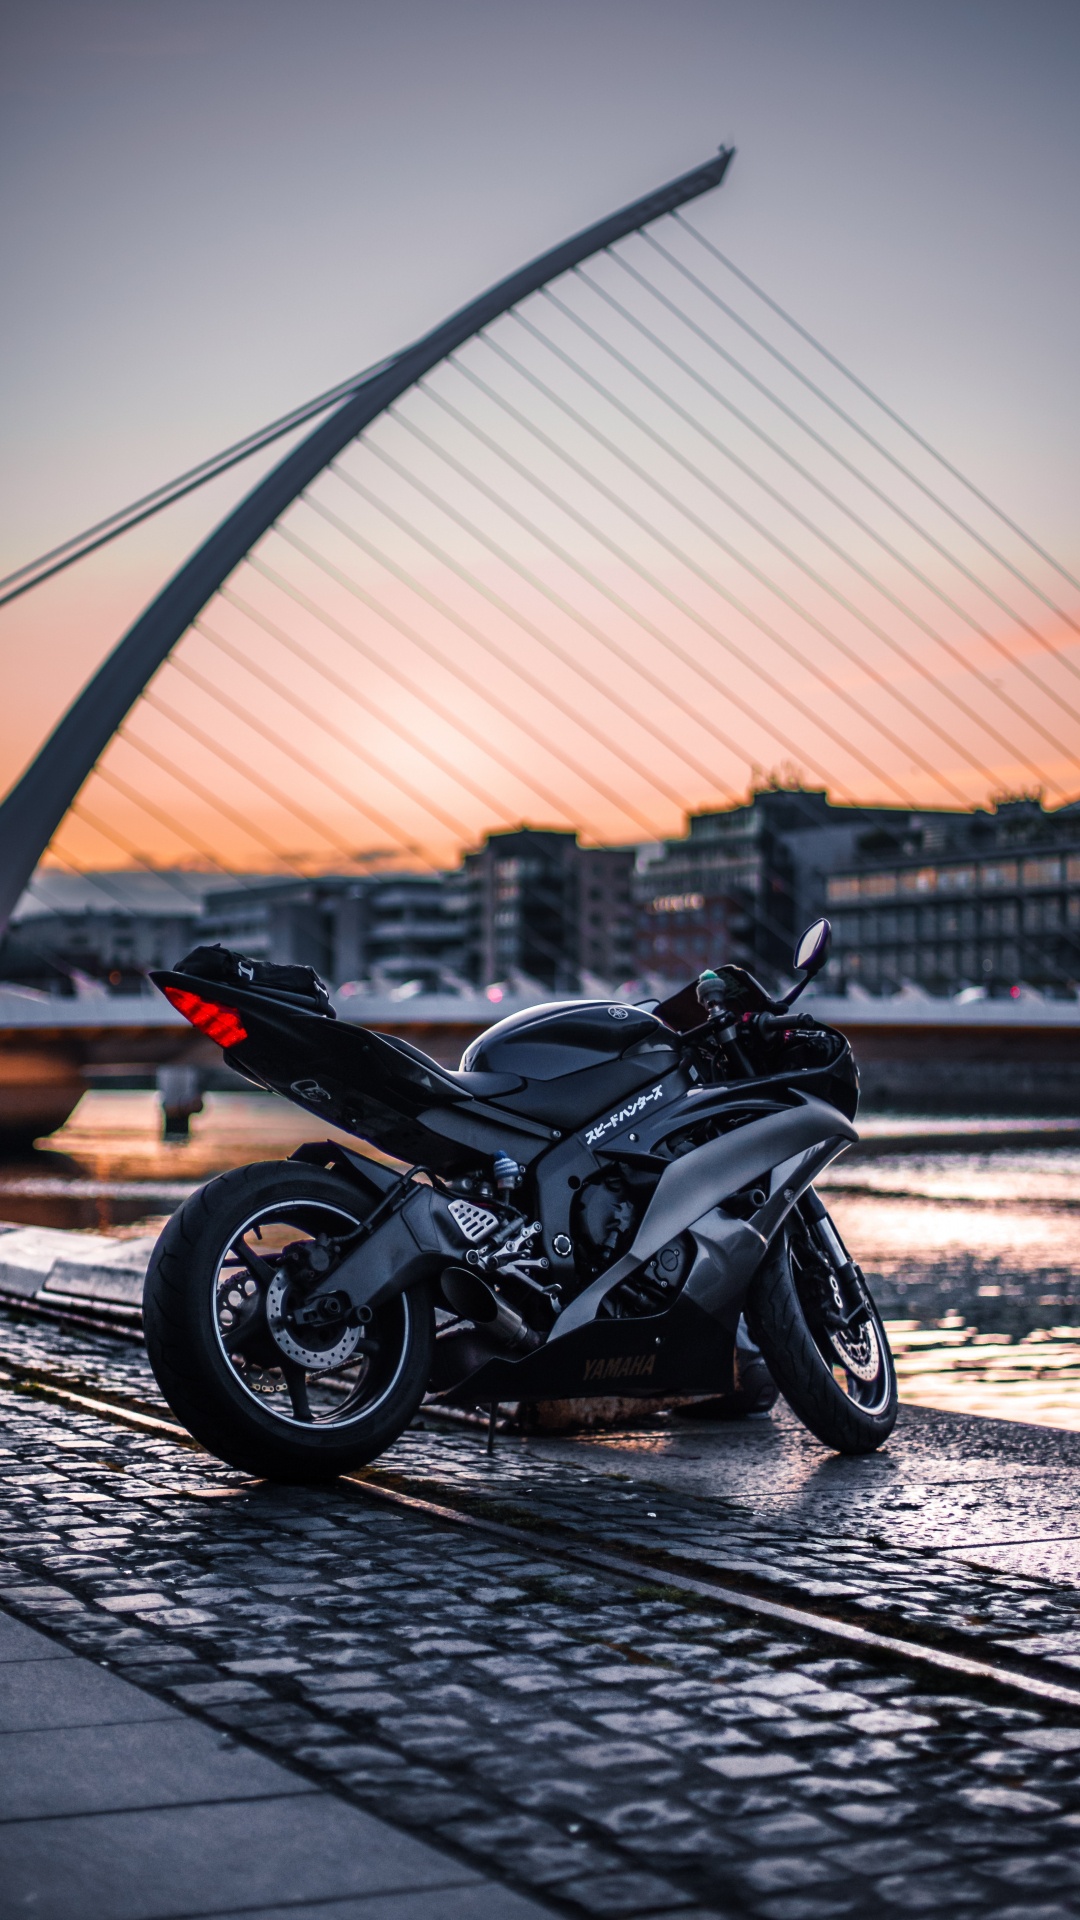 Black Sports Bike Parked on The Side of The Road. Wallpaper in 1080x1920 Resolution